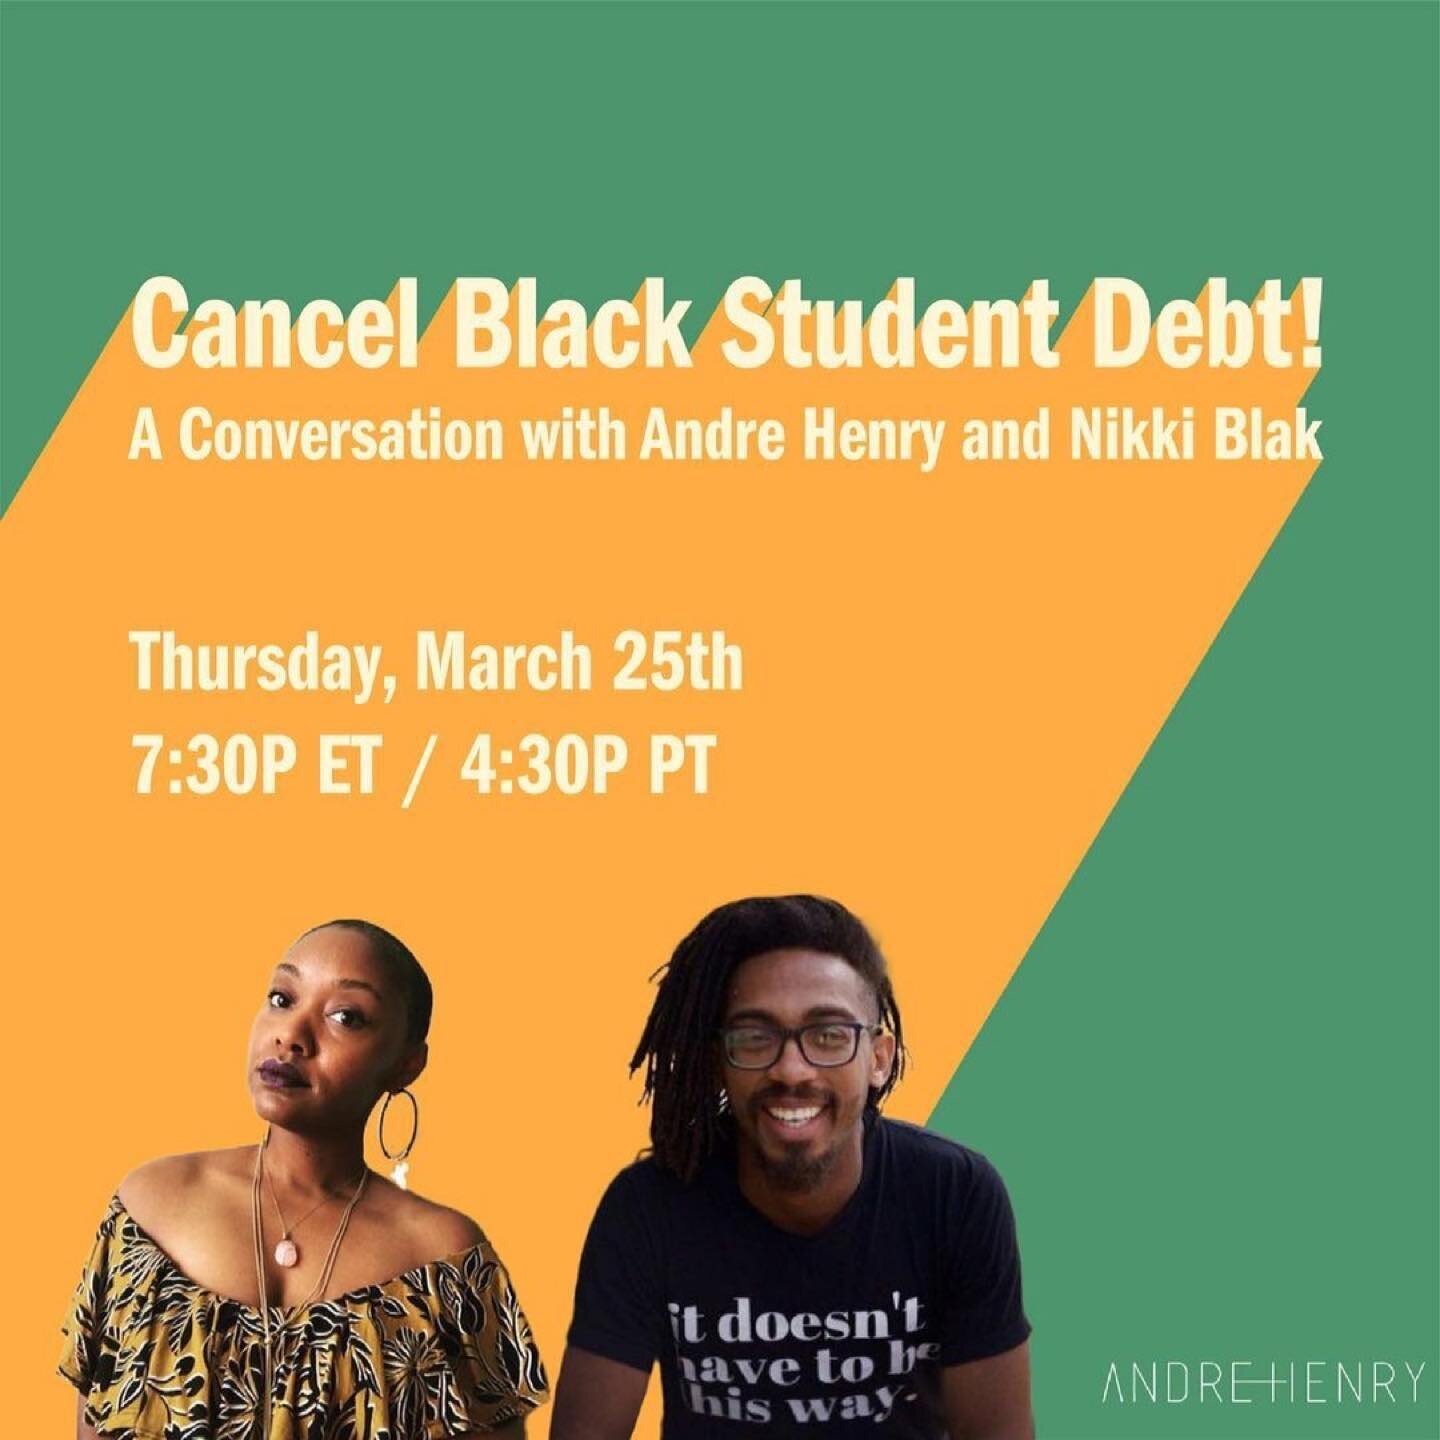 [REPOST from @theandrehenry]
Black educational debt is linked to the racial wealth gap. So what does that mean for Black women, who carry the most student debt? Let&rsquo;s get into it with @nikkiblak tomorrow 7:30P ET/4:30P PT.

Come with questions.